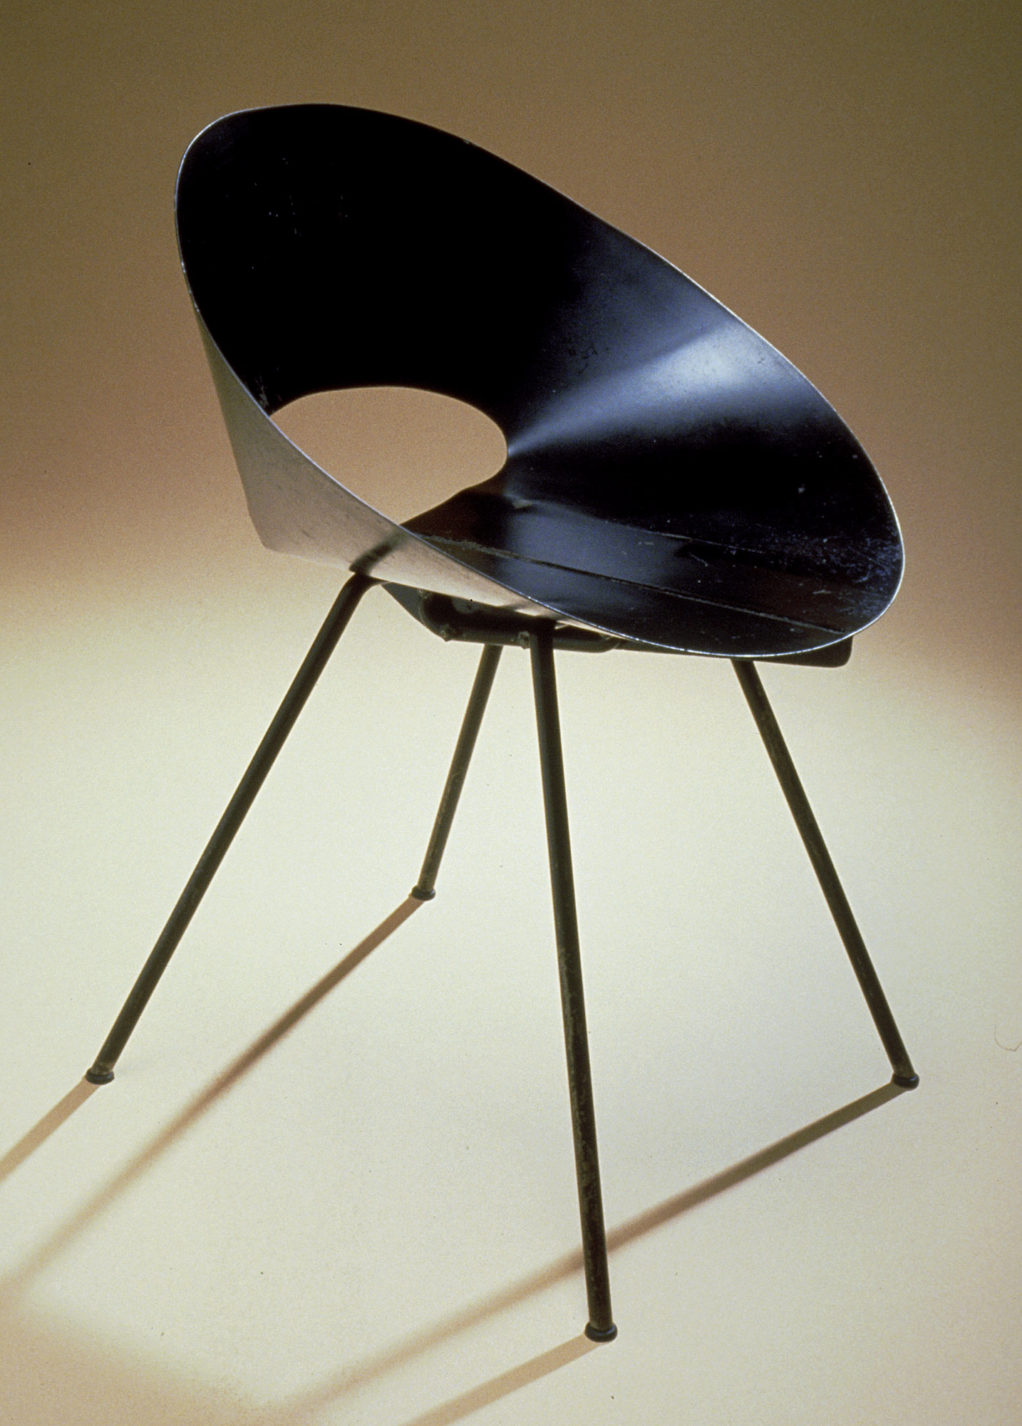 Chair with seat and back formed from sheet of black steel wrapped into a cone shape and four slanting legs.